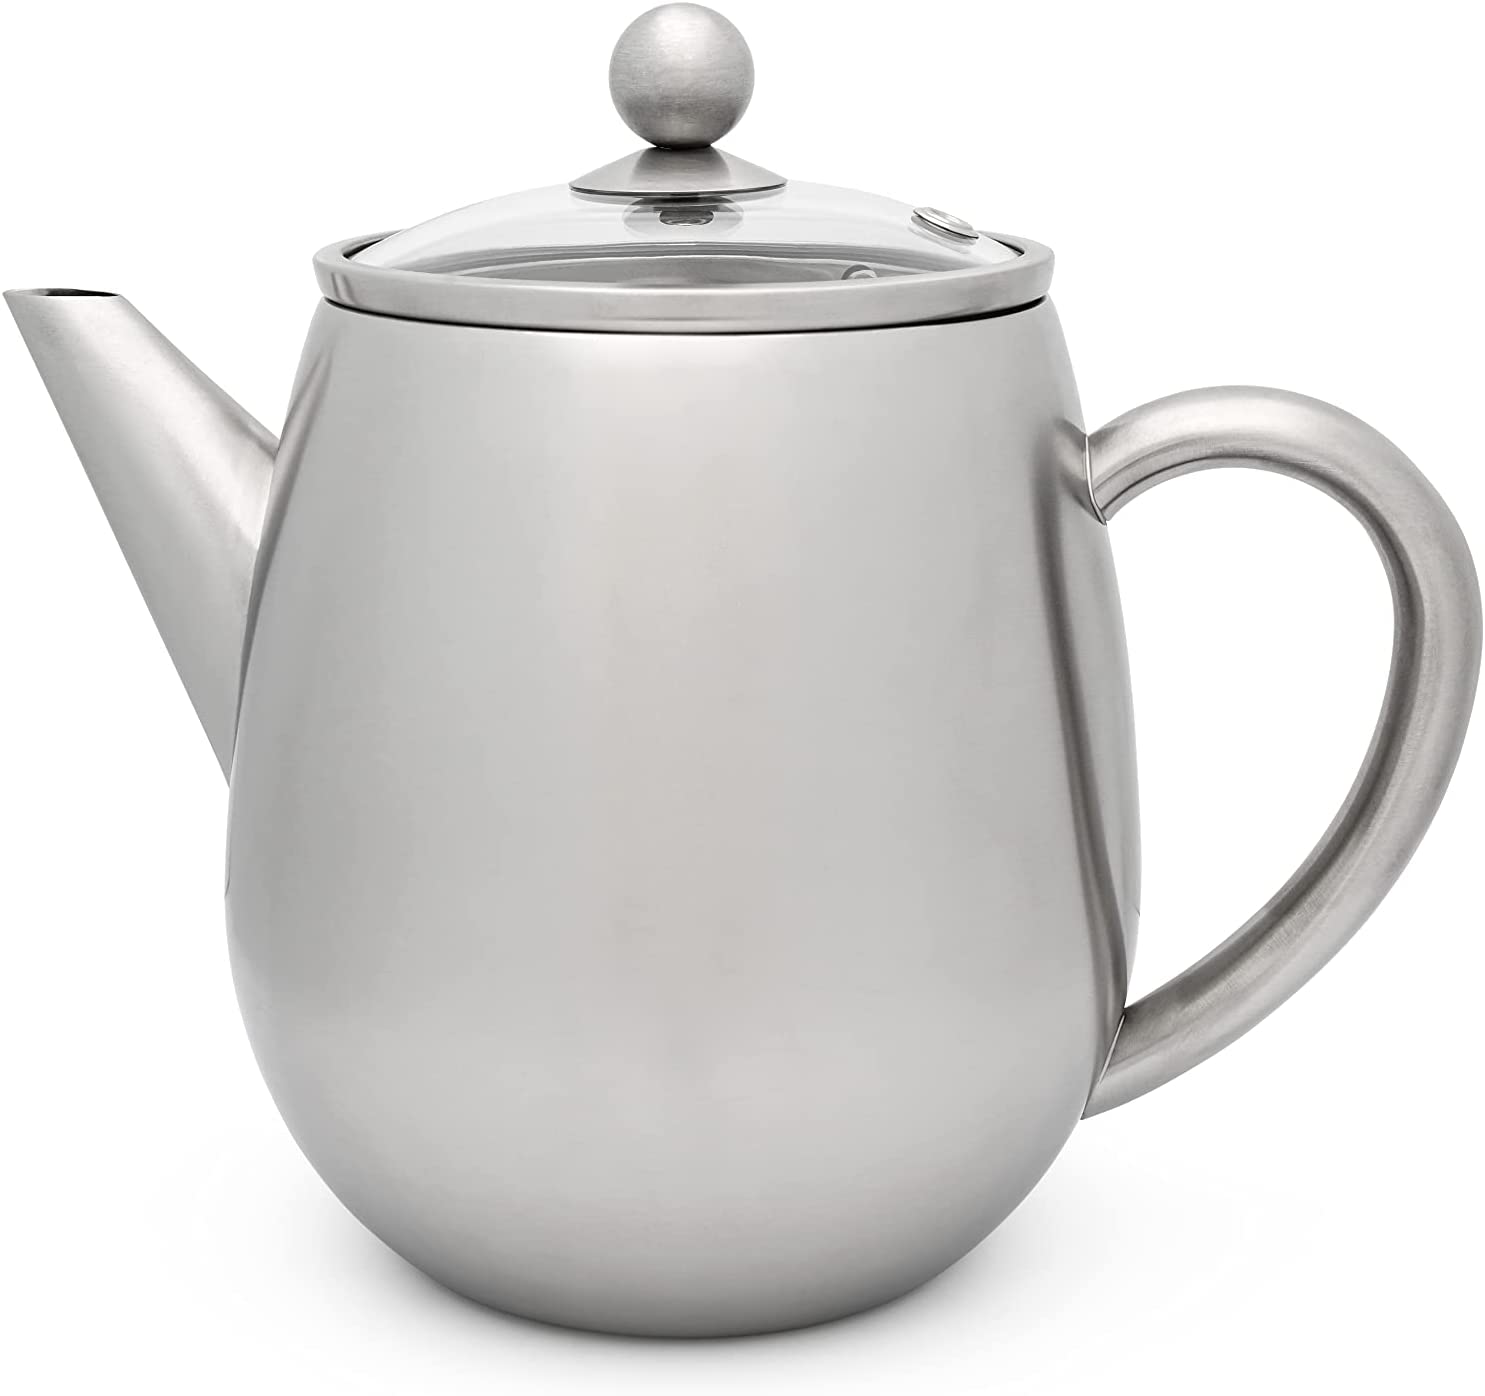 Small Tall Double-Walled Stainless Steel Teapot 1.1 Lites with filter Strainer for Preparation of Loose Tea